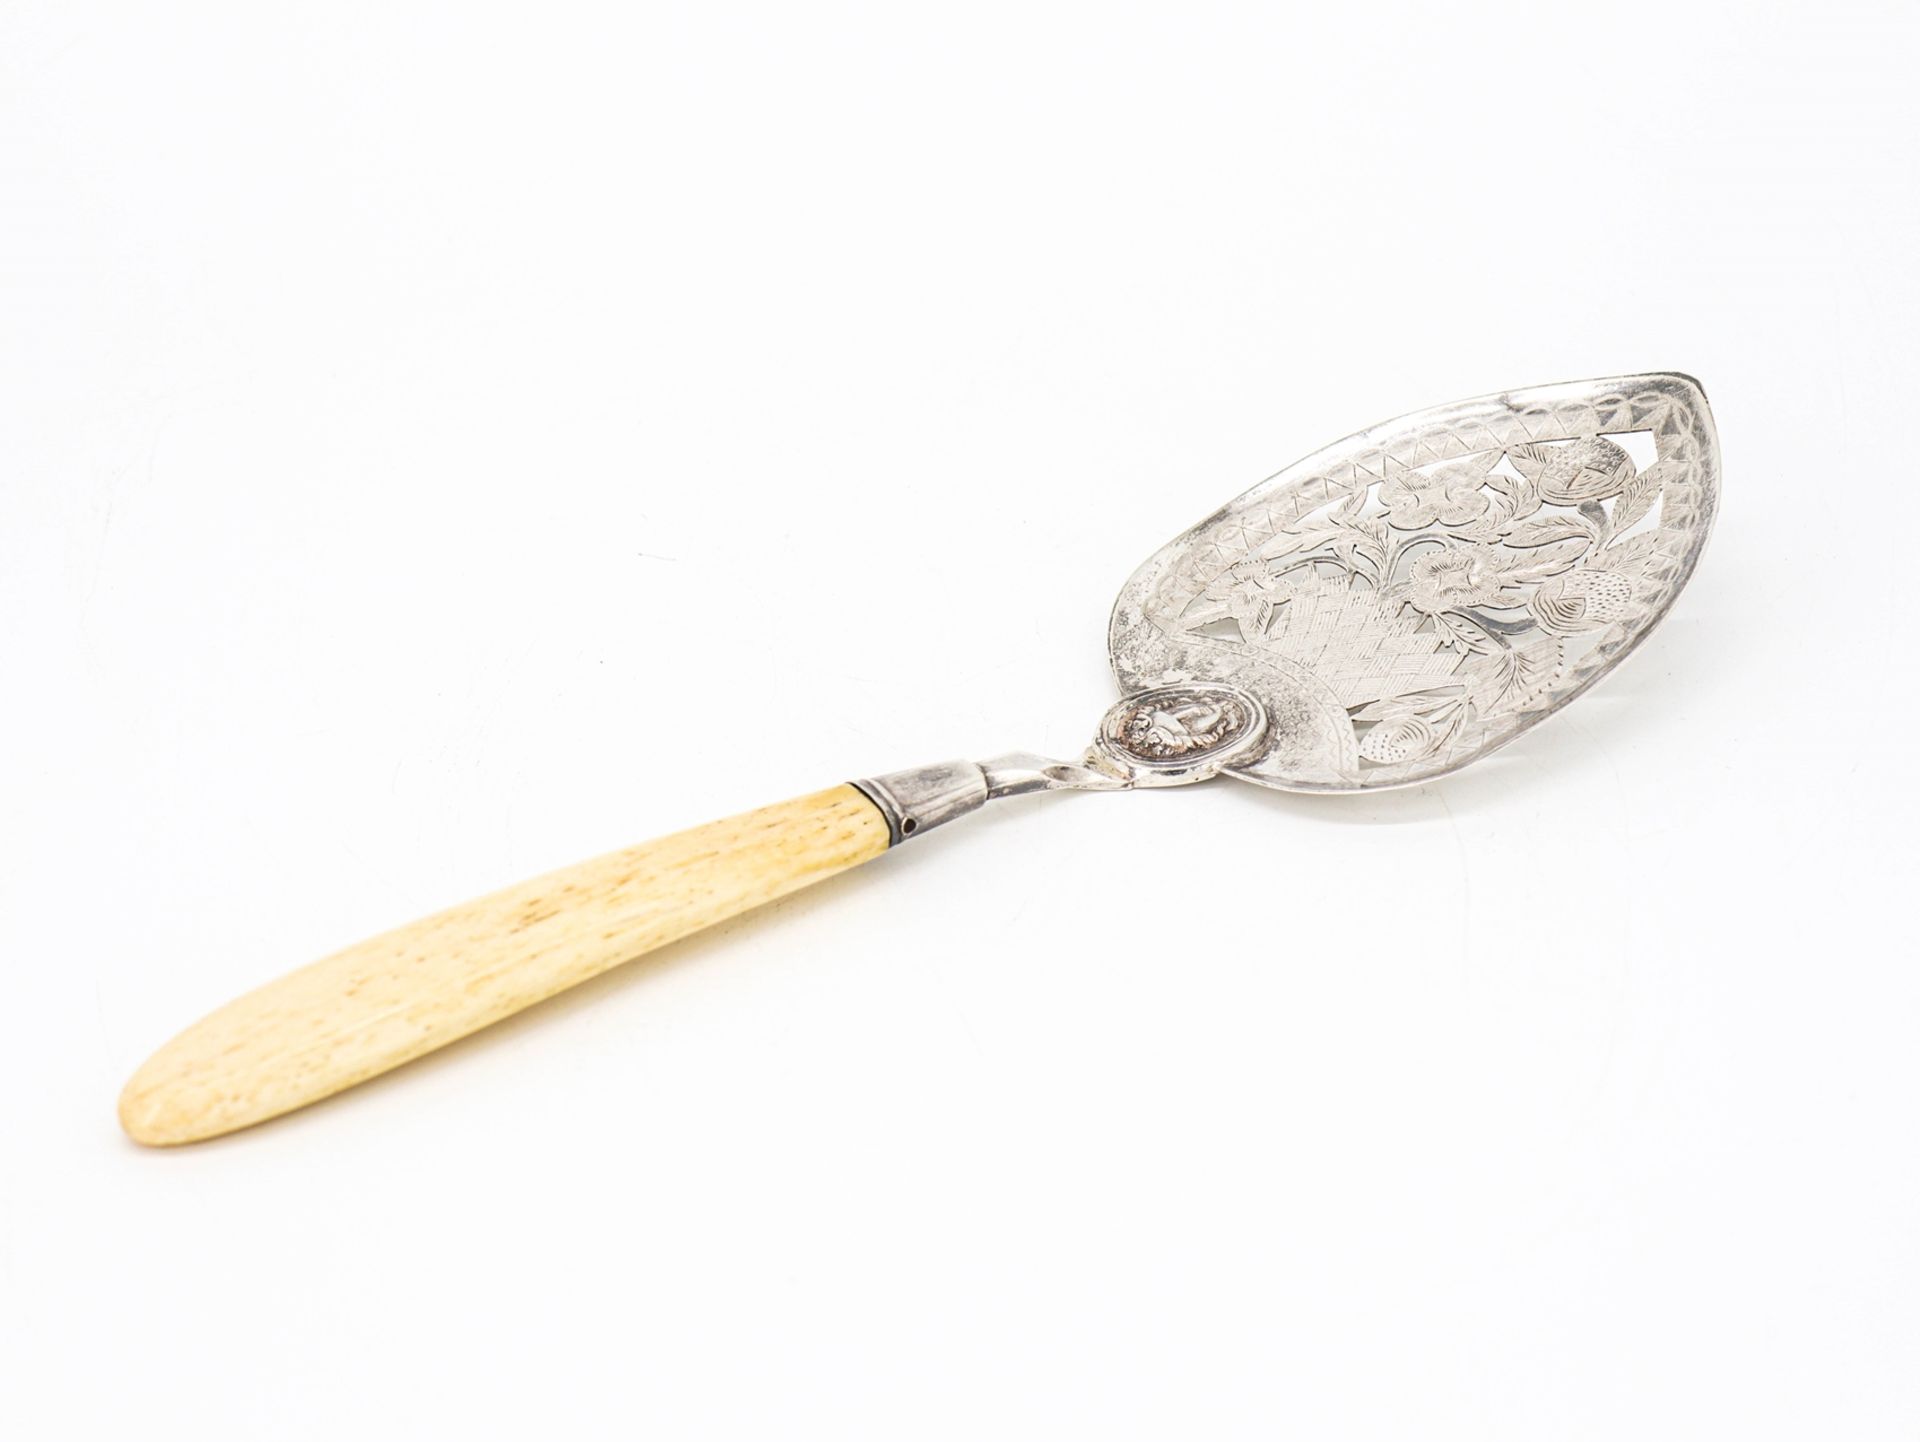 Pâté server with leg handle, chased silver, finest chasing, around 1800 - Image 7 of 7